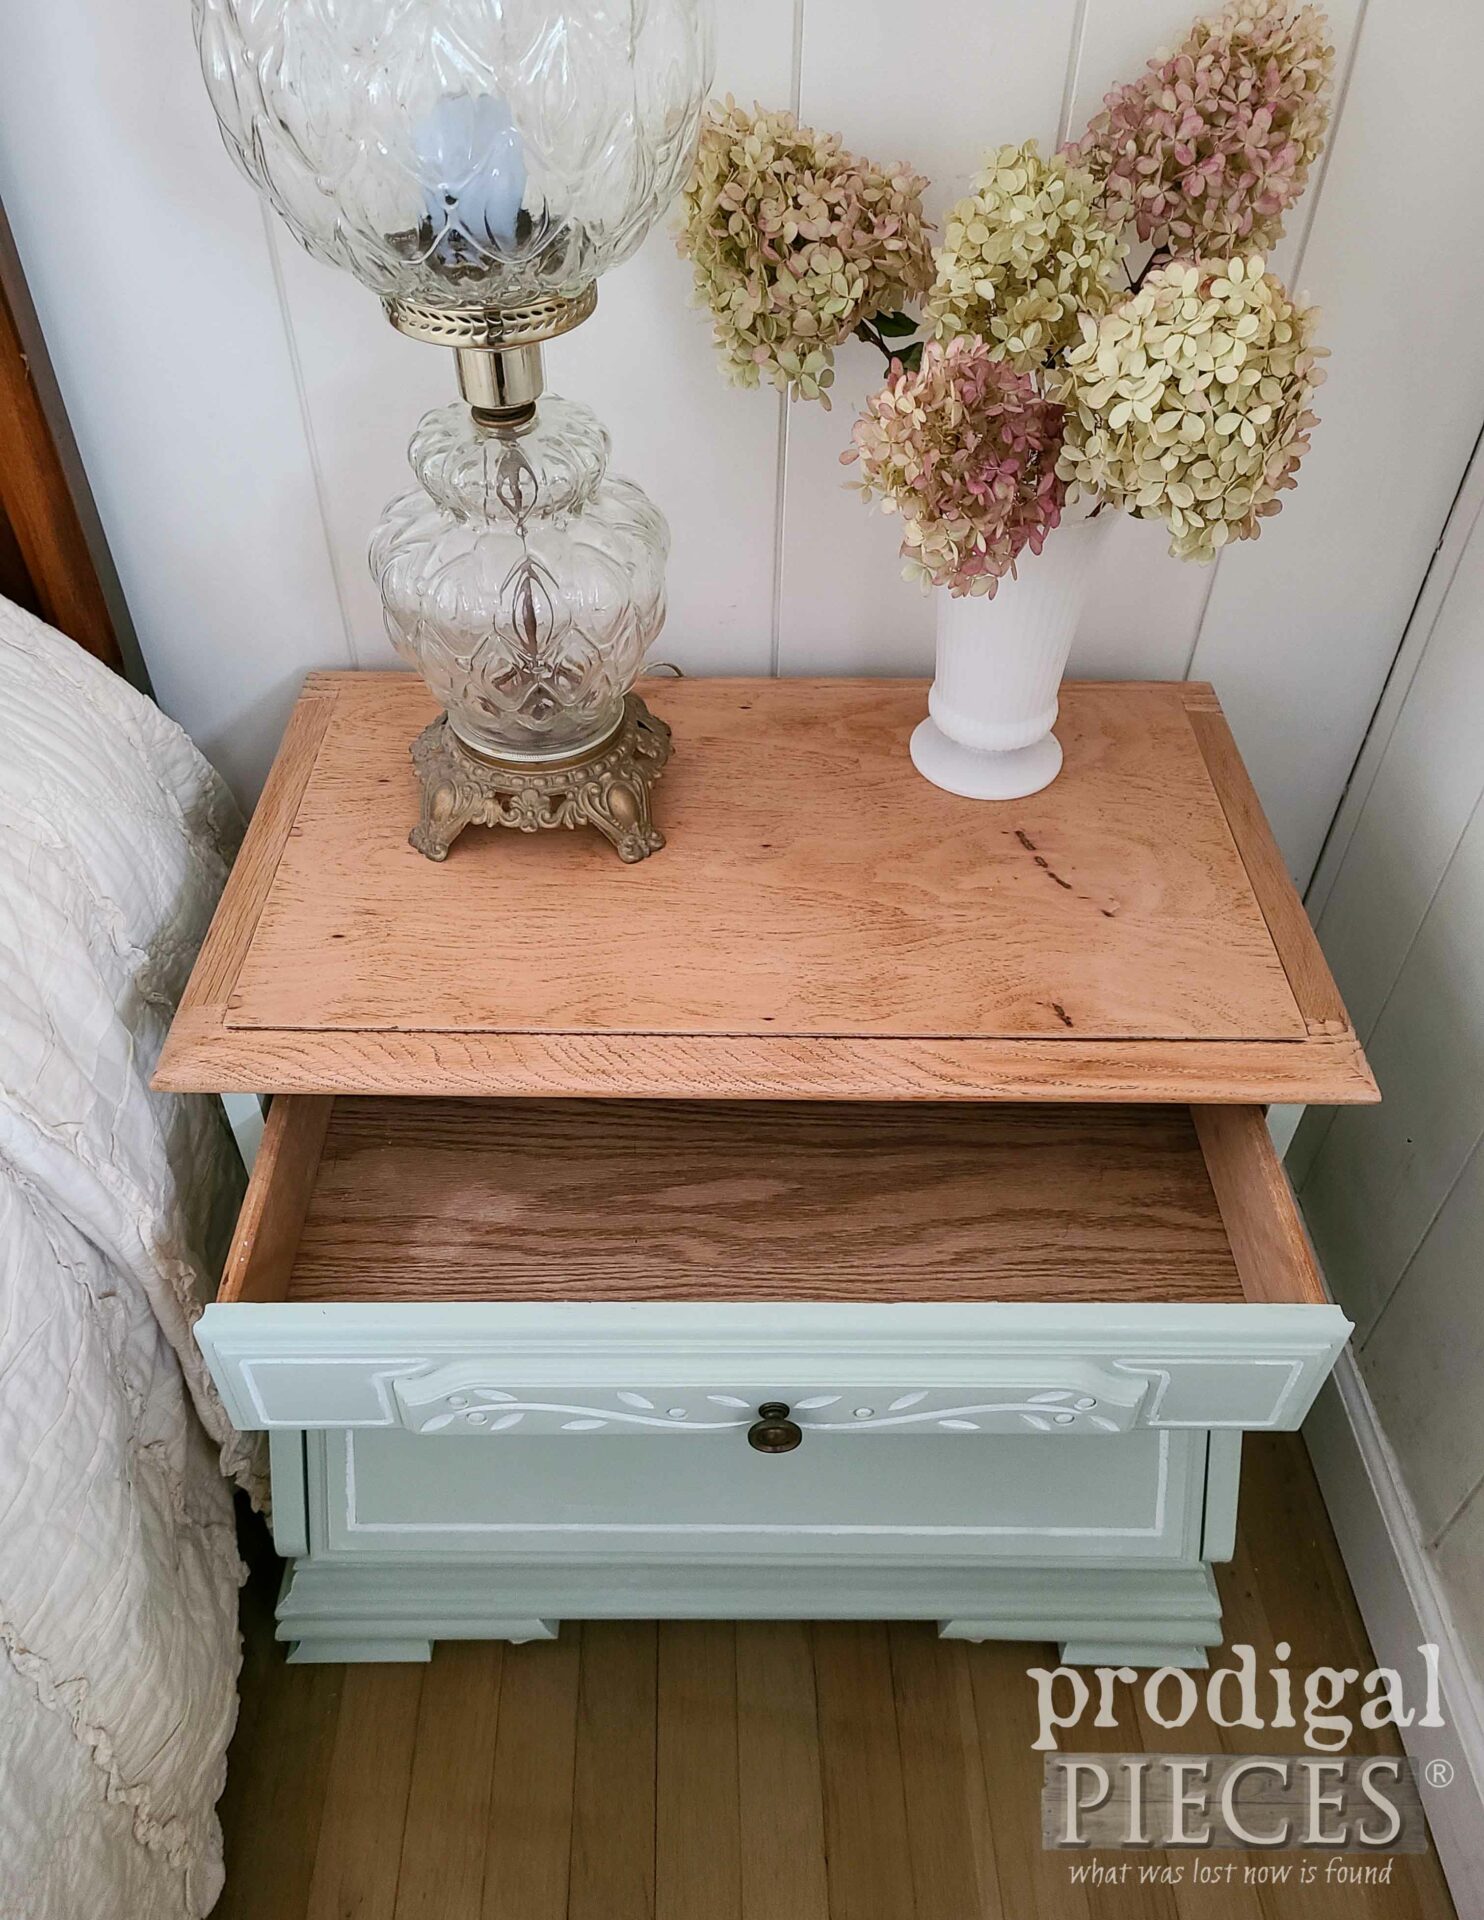 Open Top Drawer of Vintage Chest Nightstand | prodigalpieces.com #prodigalpieces #furniture